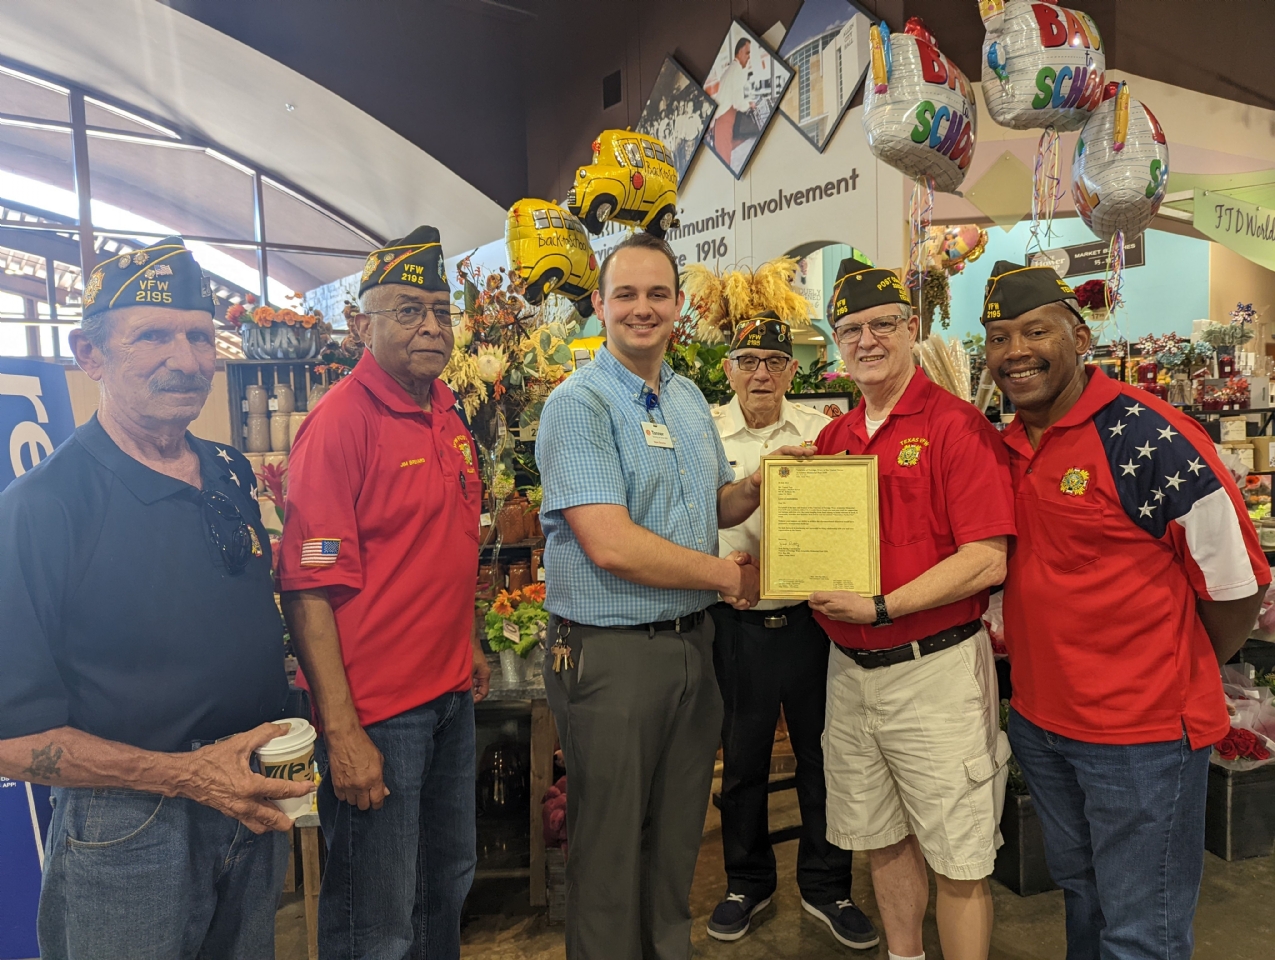 VFW Post 2195 presented a Letter of Appreciation to Market Street on Thursday, 4 August @ 11 AM